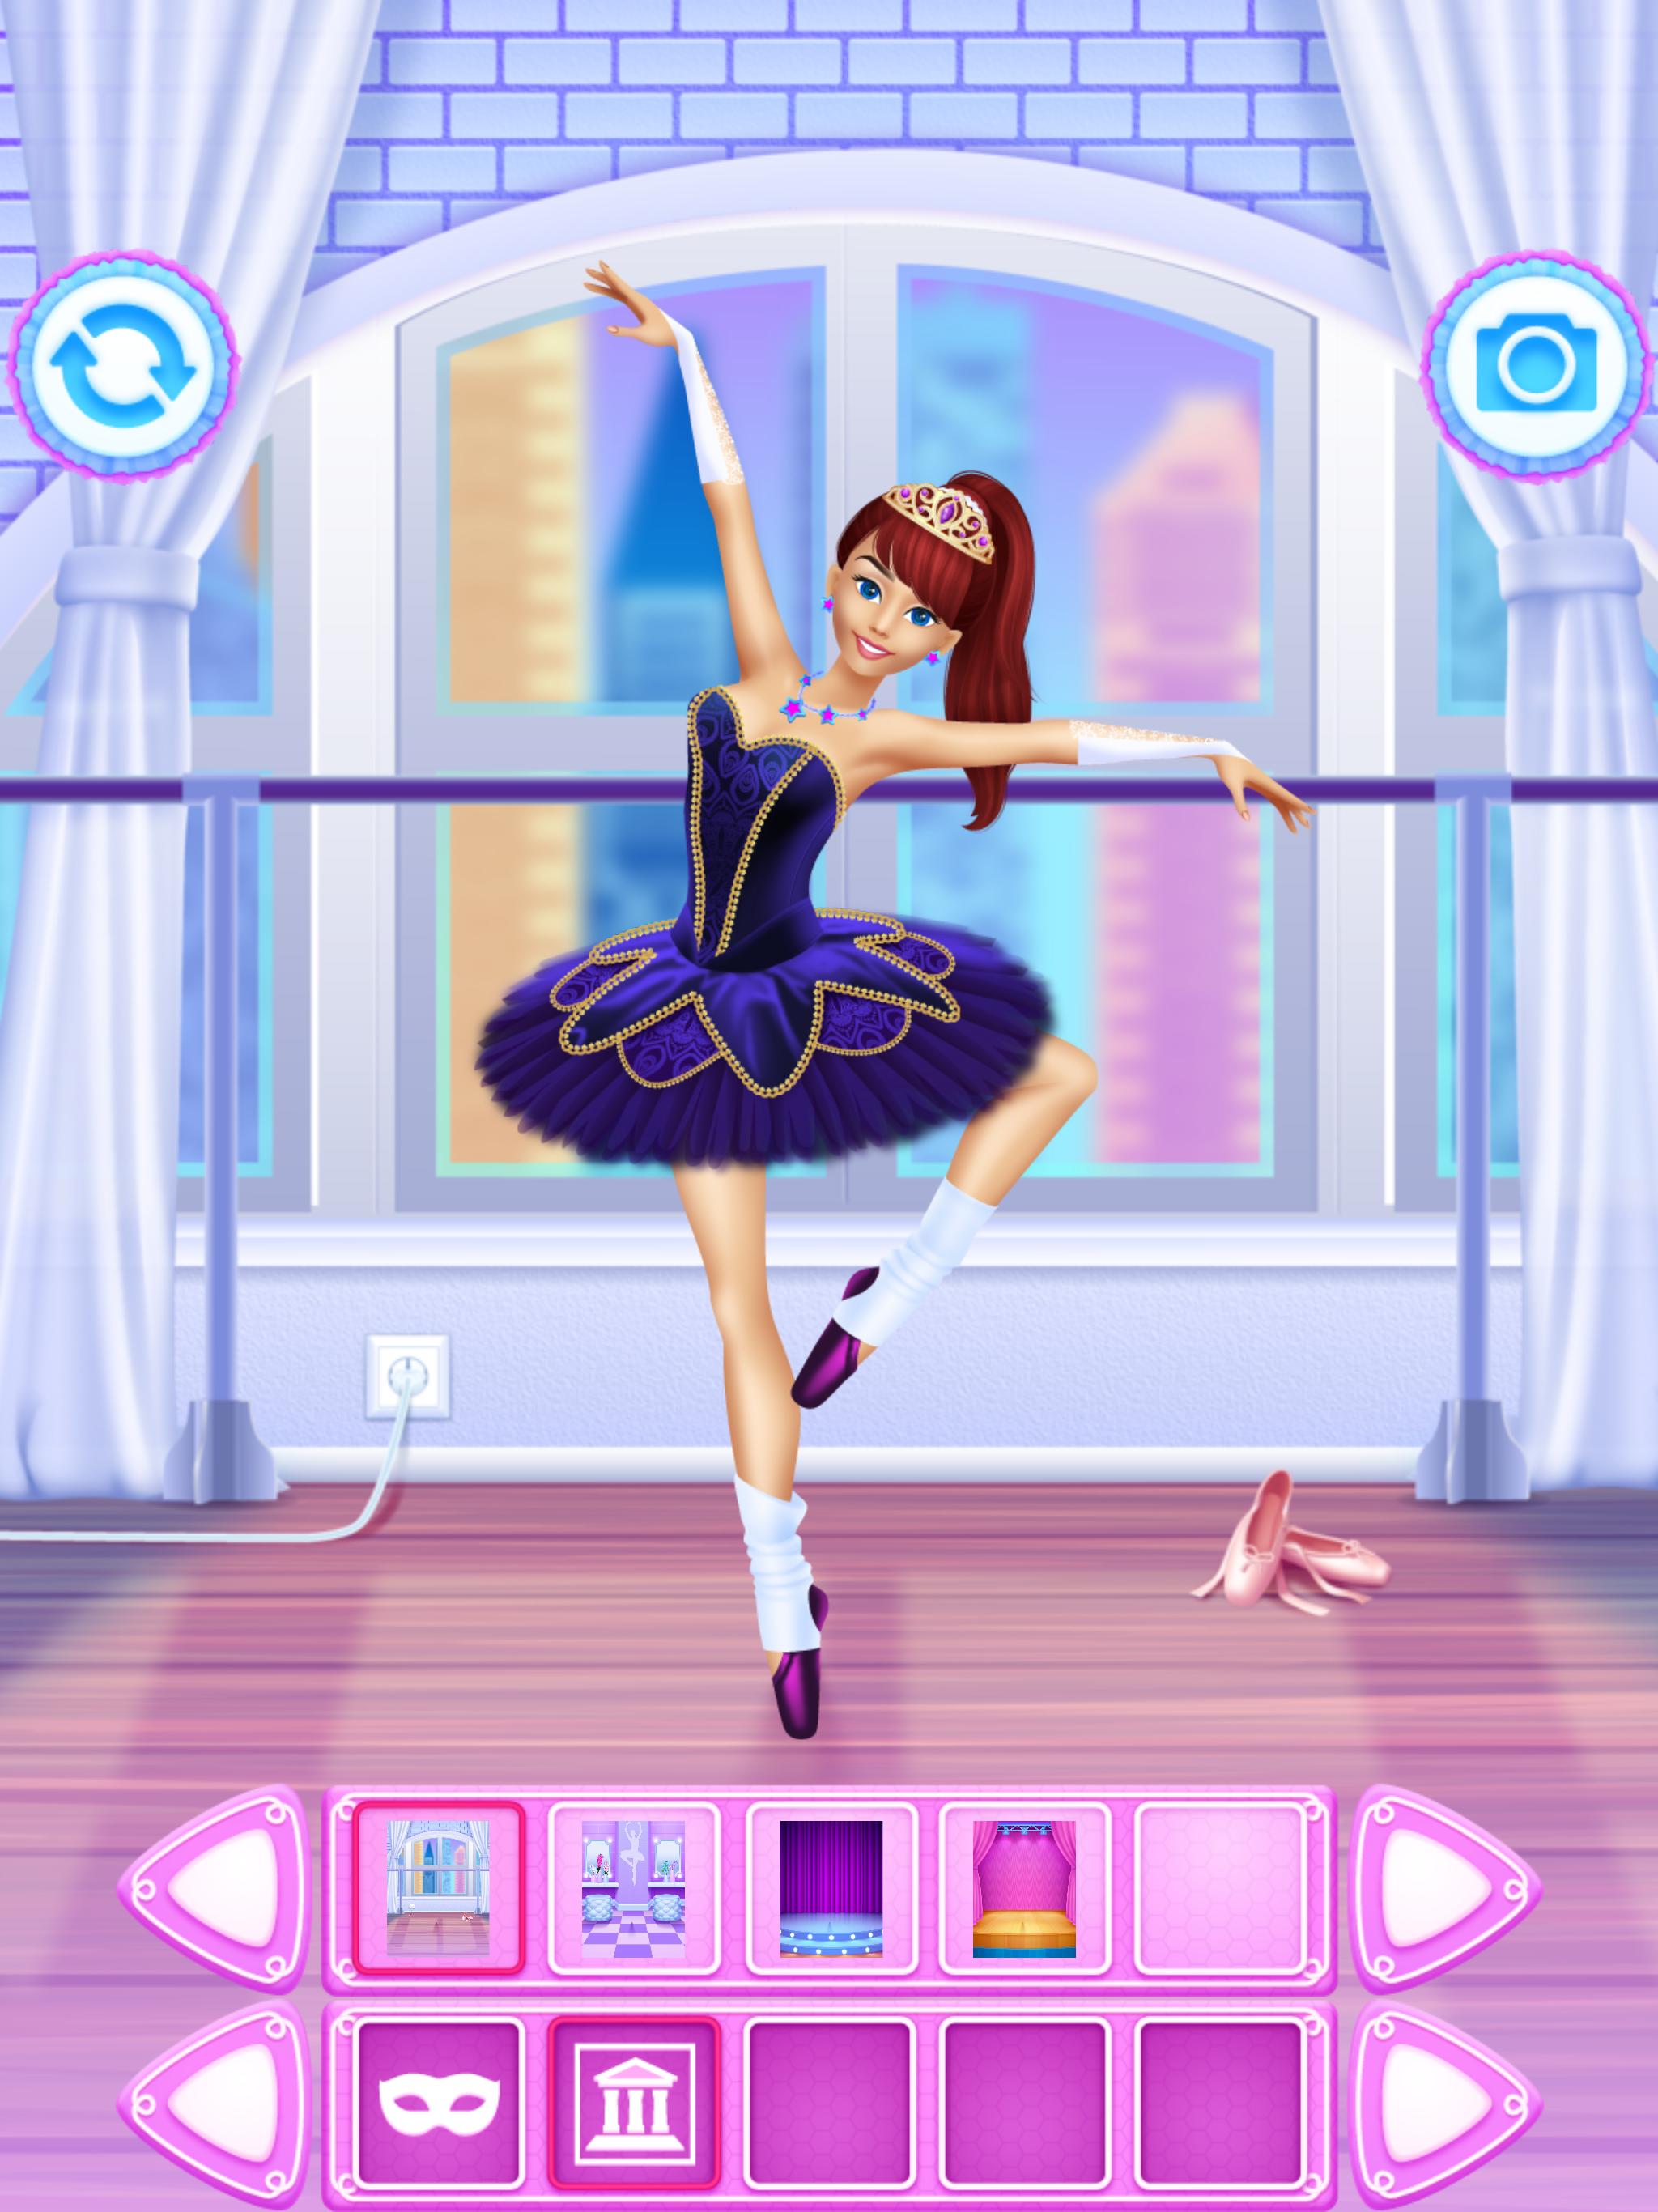 Ballerina for Android - APK Download